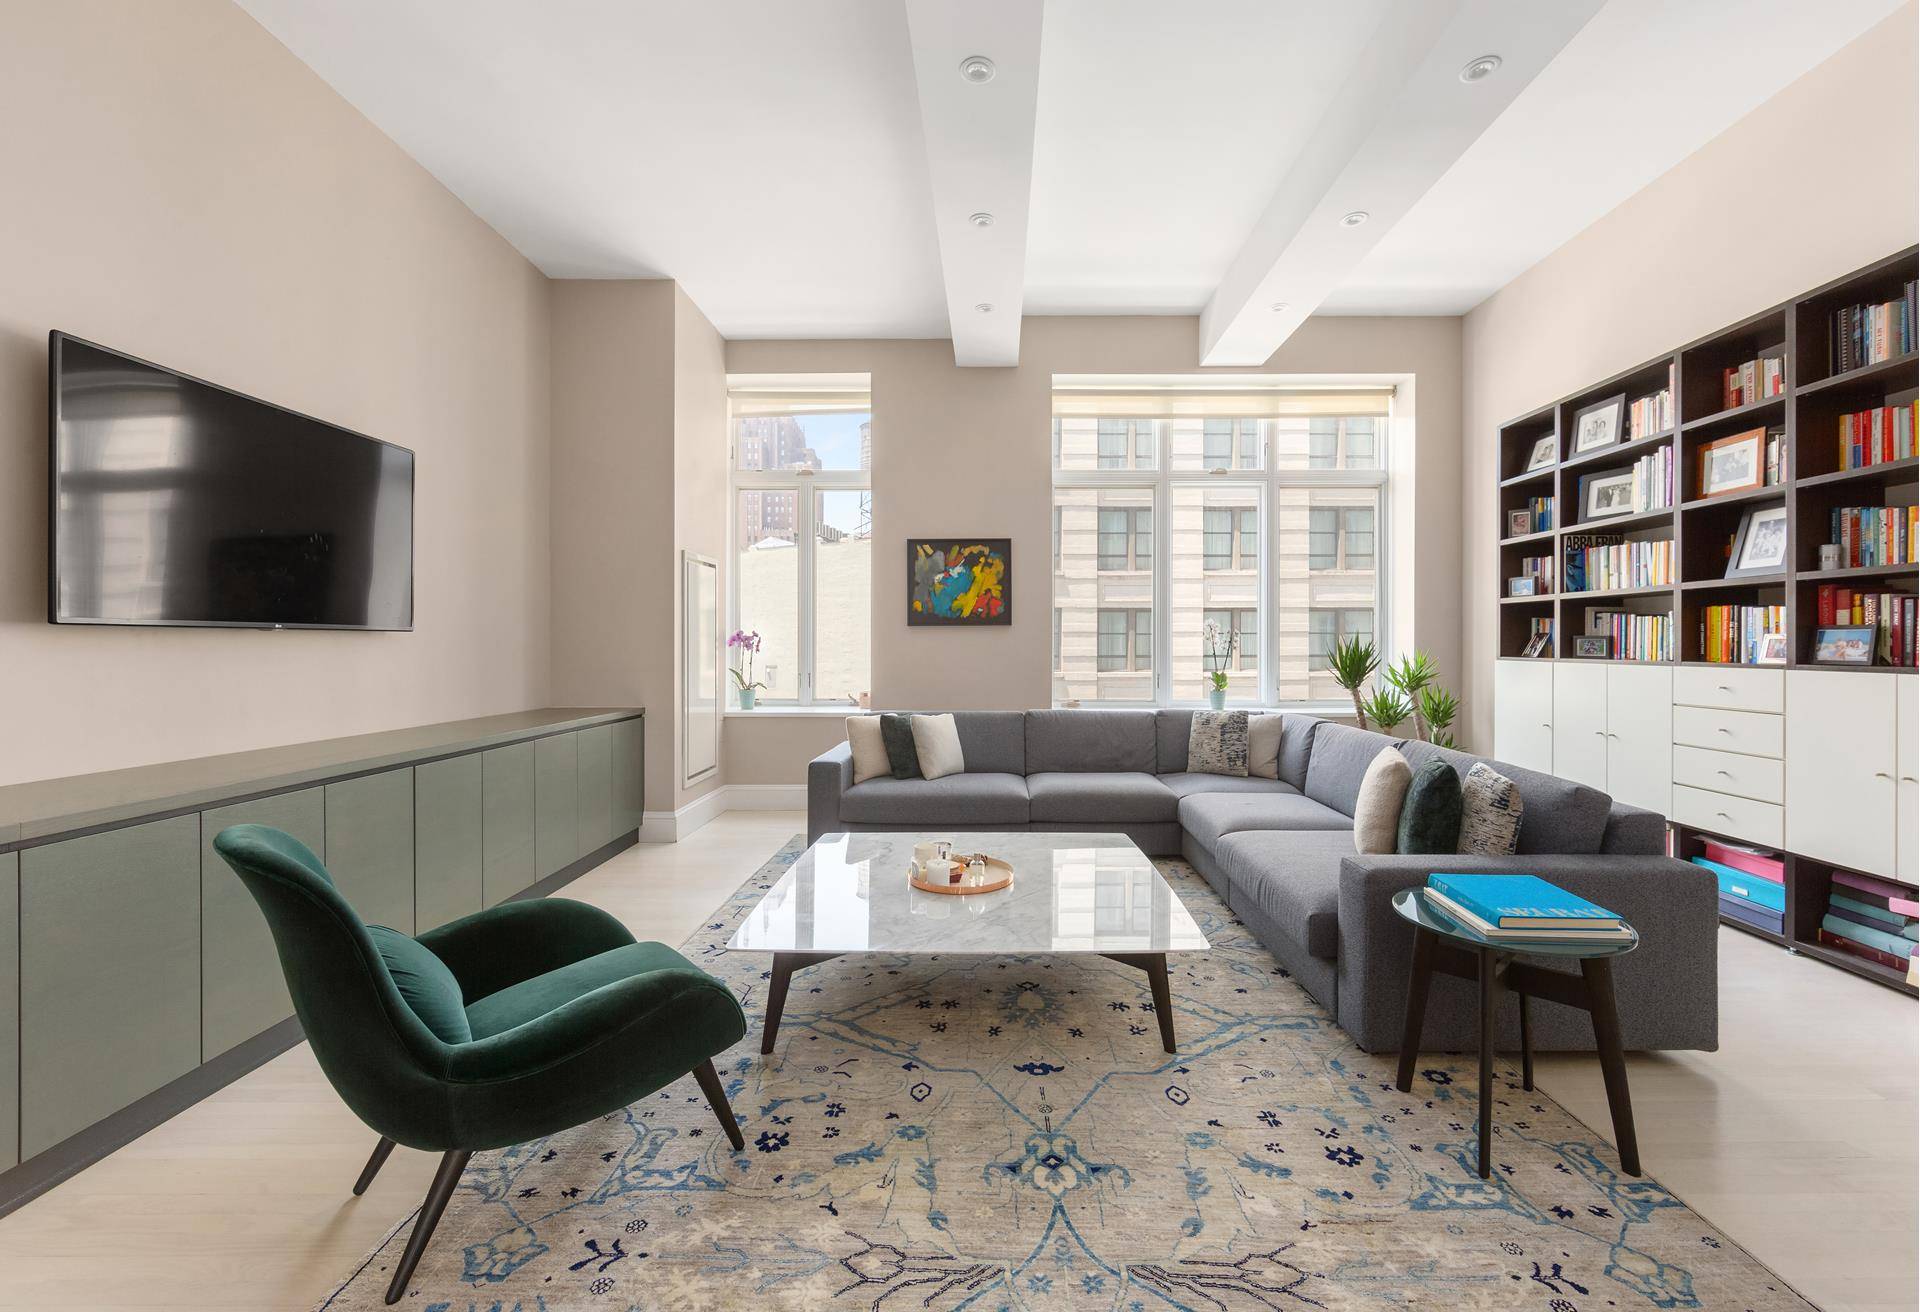 Introducing Residence 5C at 129 Lafayette Street An incredible three bedroom, two bathroom SoHo loft, with soaring 12' beamed ceilings and a private balcony.